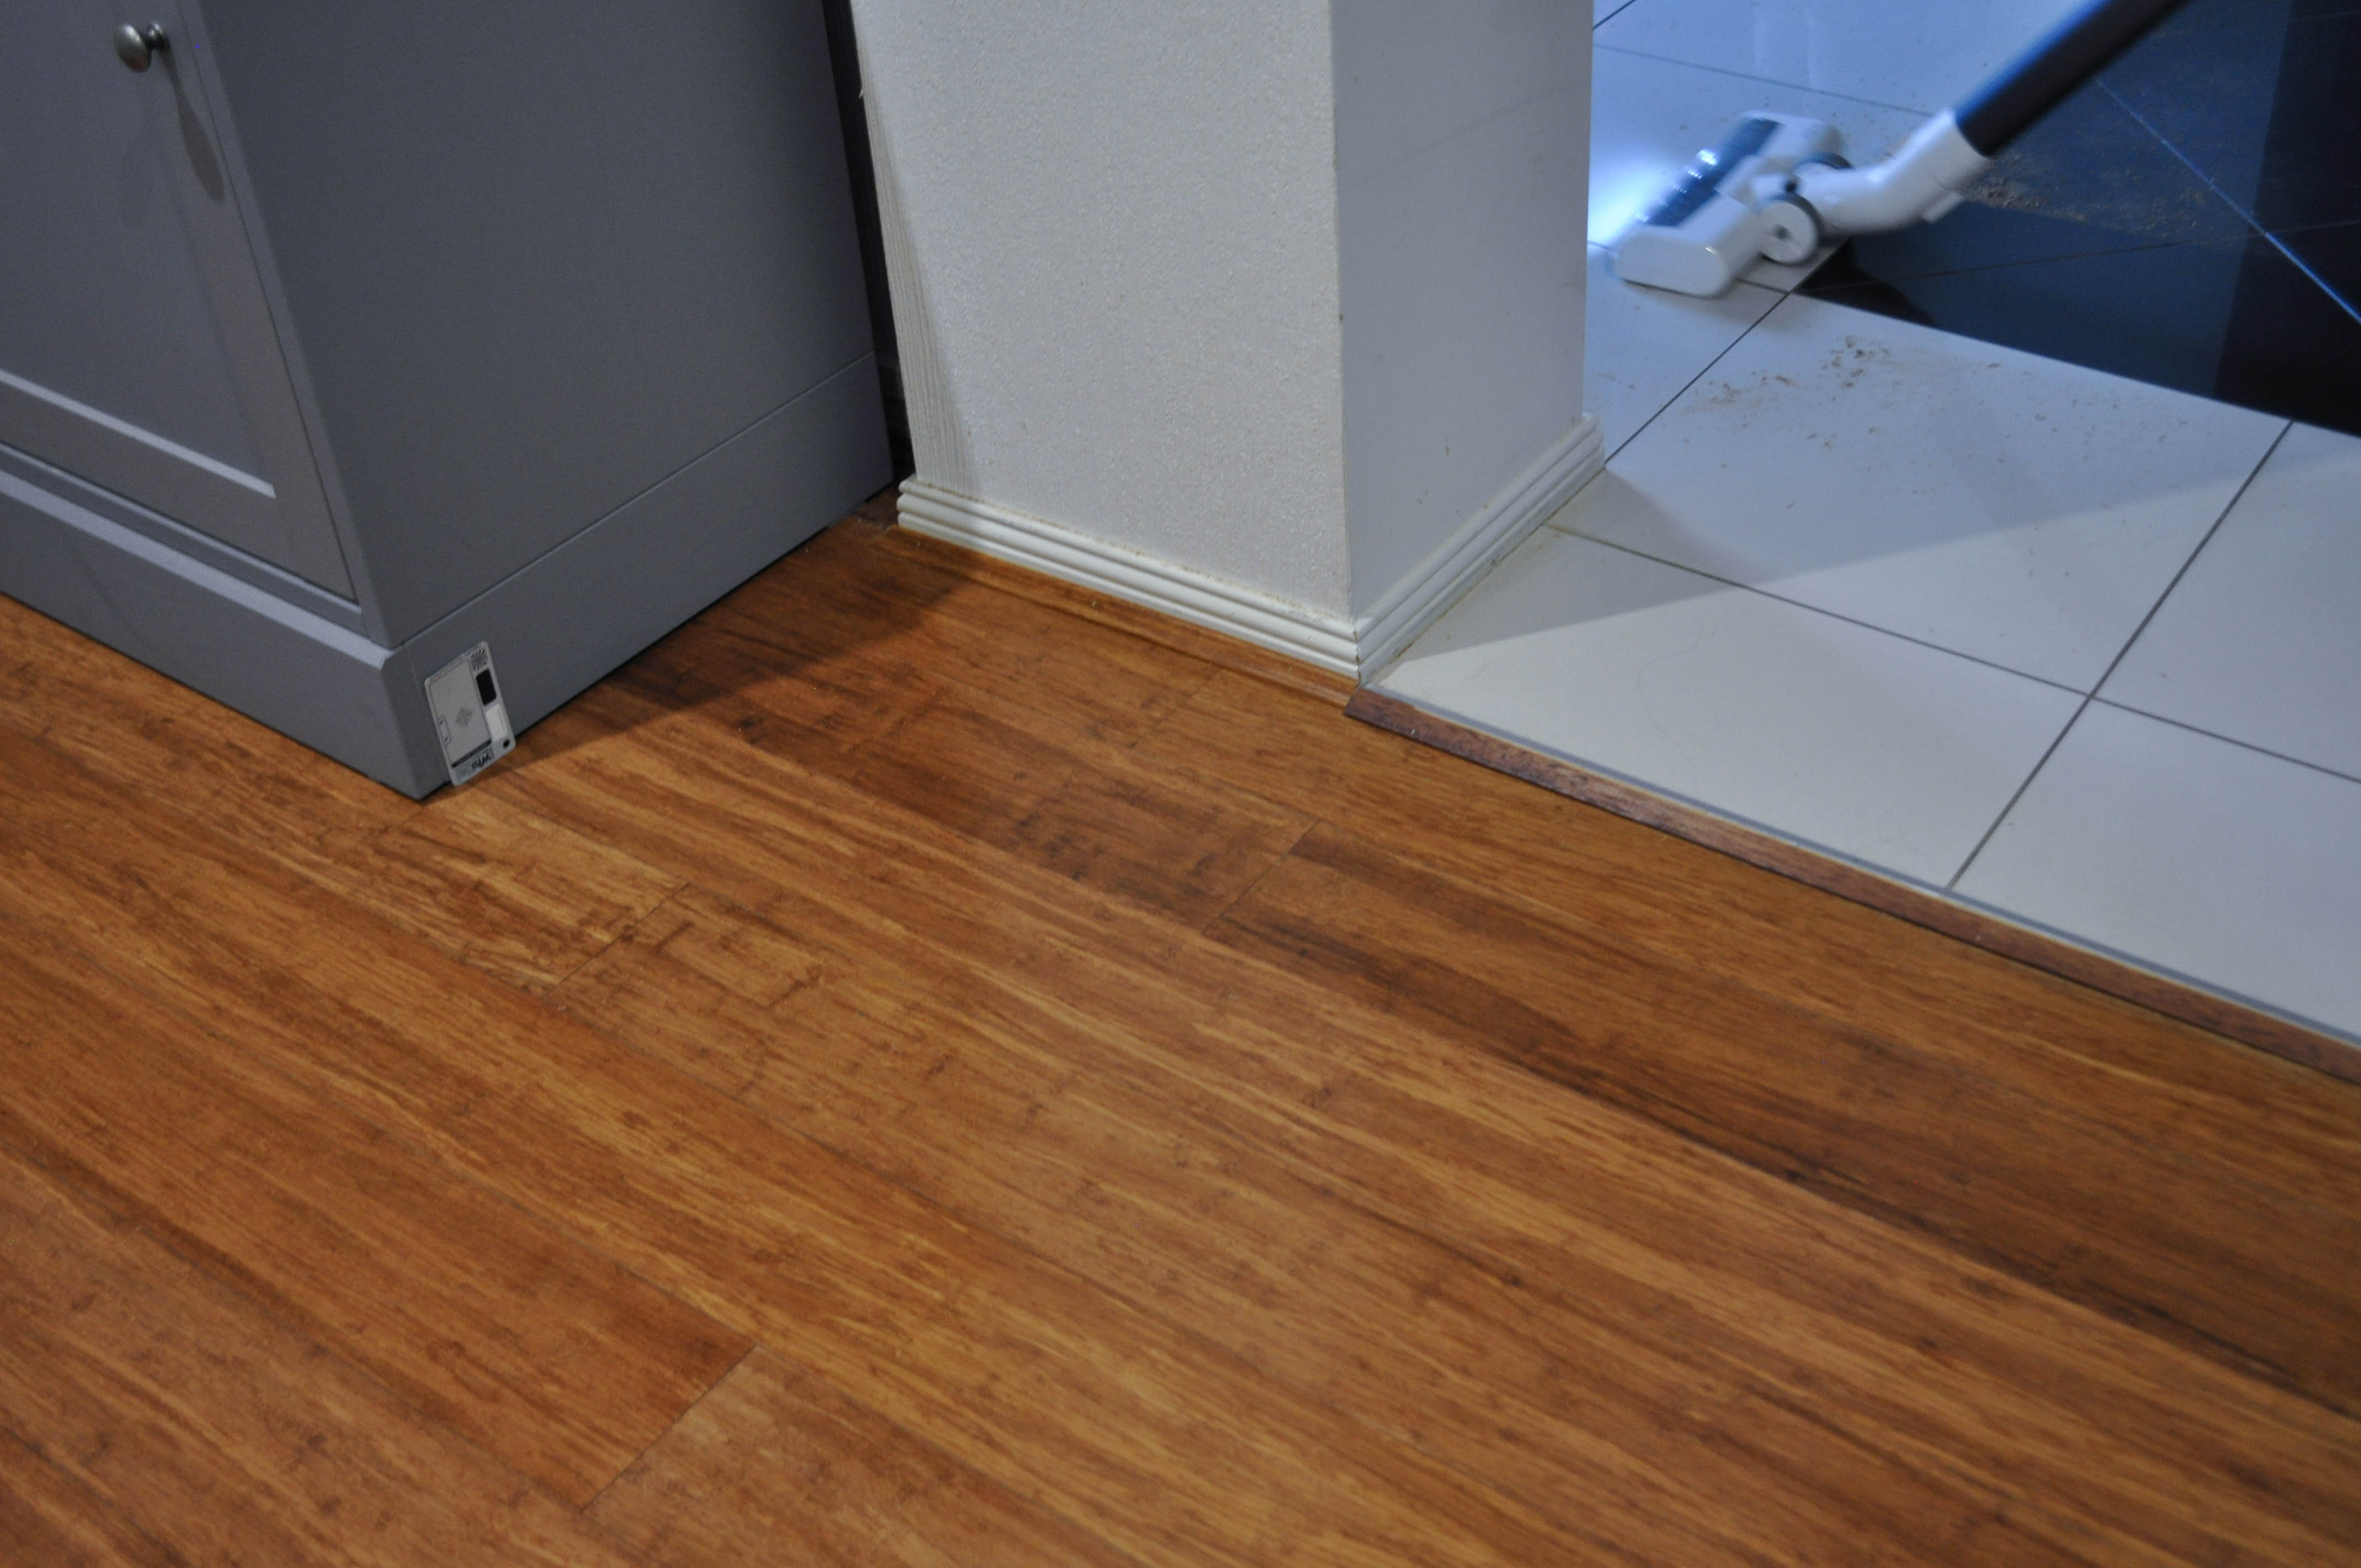 showing a room where the floor is covered with bamboo flooring abutting to white ceramic tiles. A grey cabinet is on top of the bamboo
	floor.